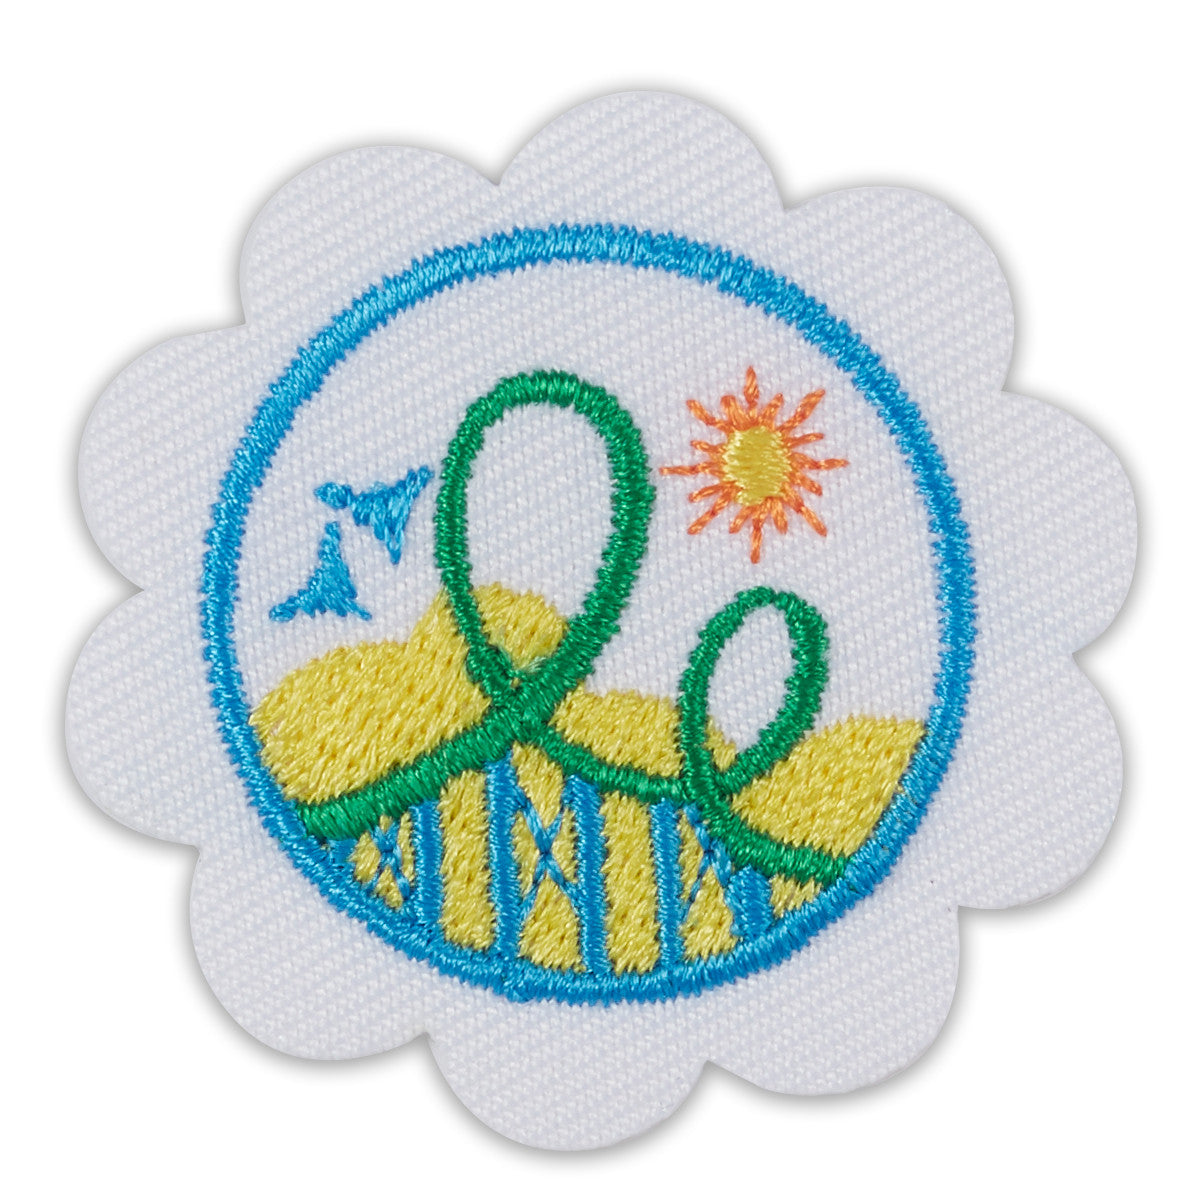 Girl Scouts Daisy Roller Coaster Design Challenge Badge - Basics Clothing Store